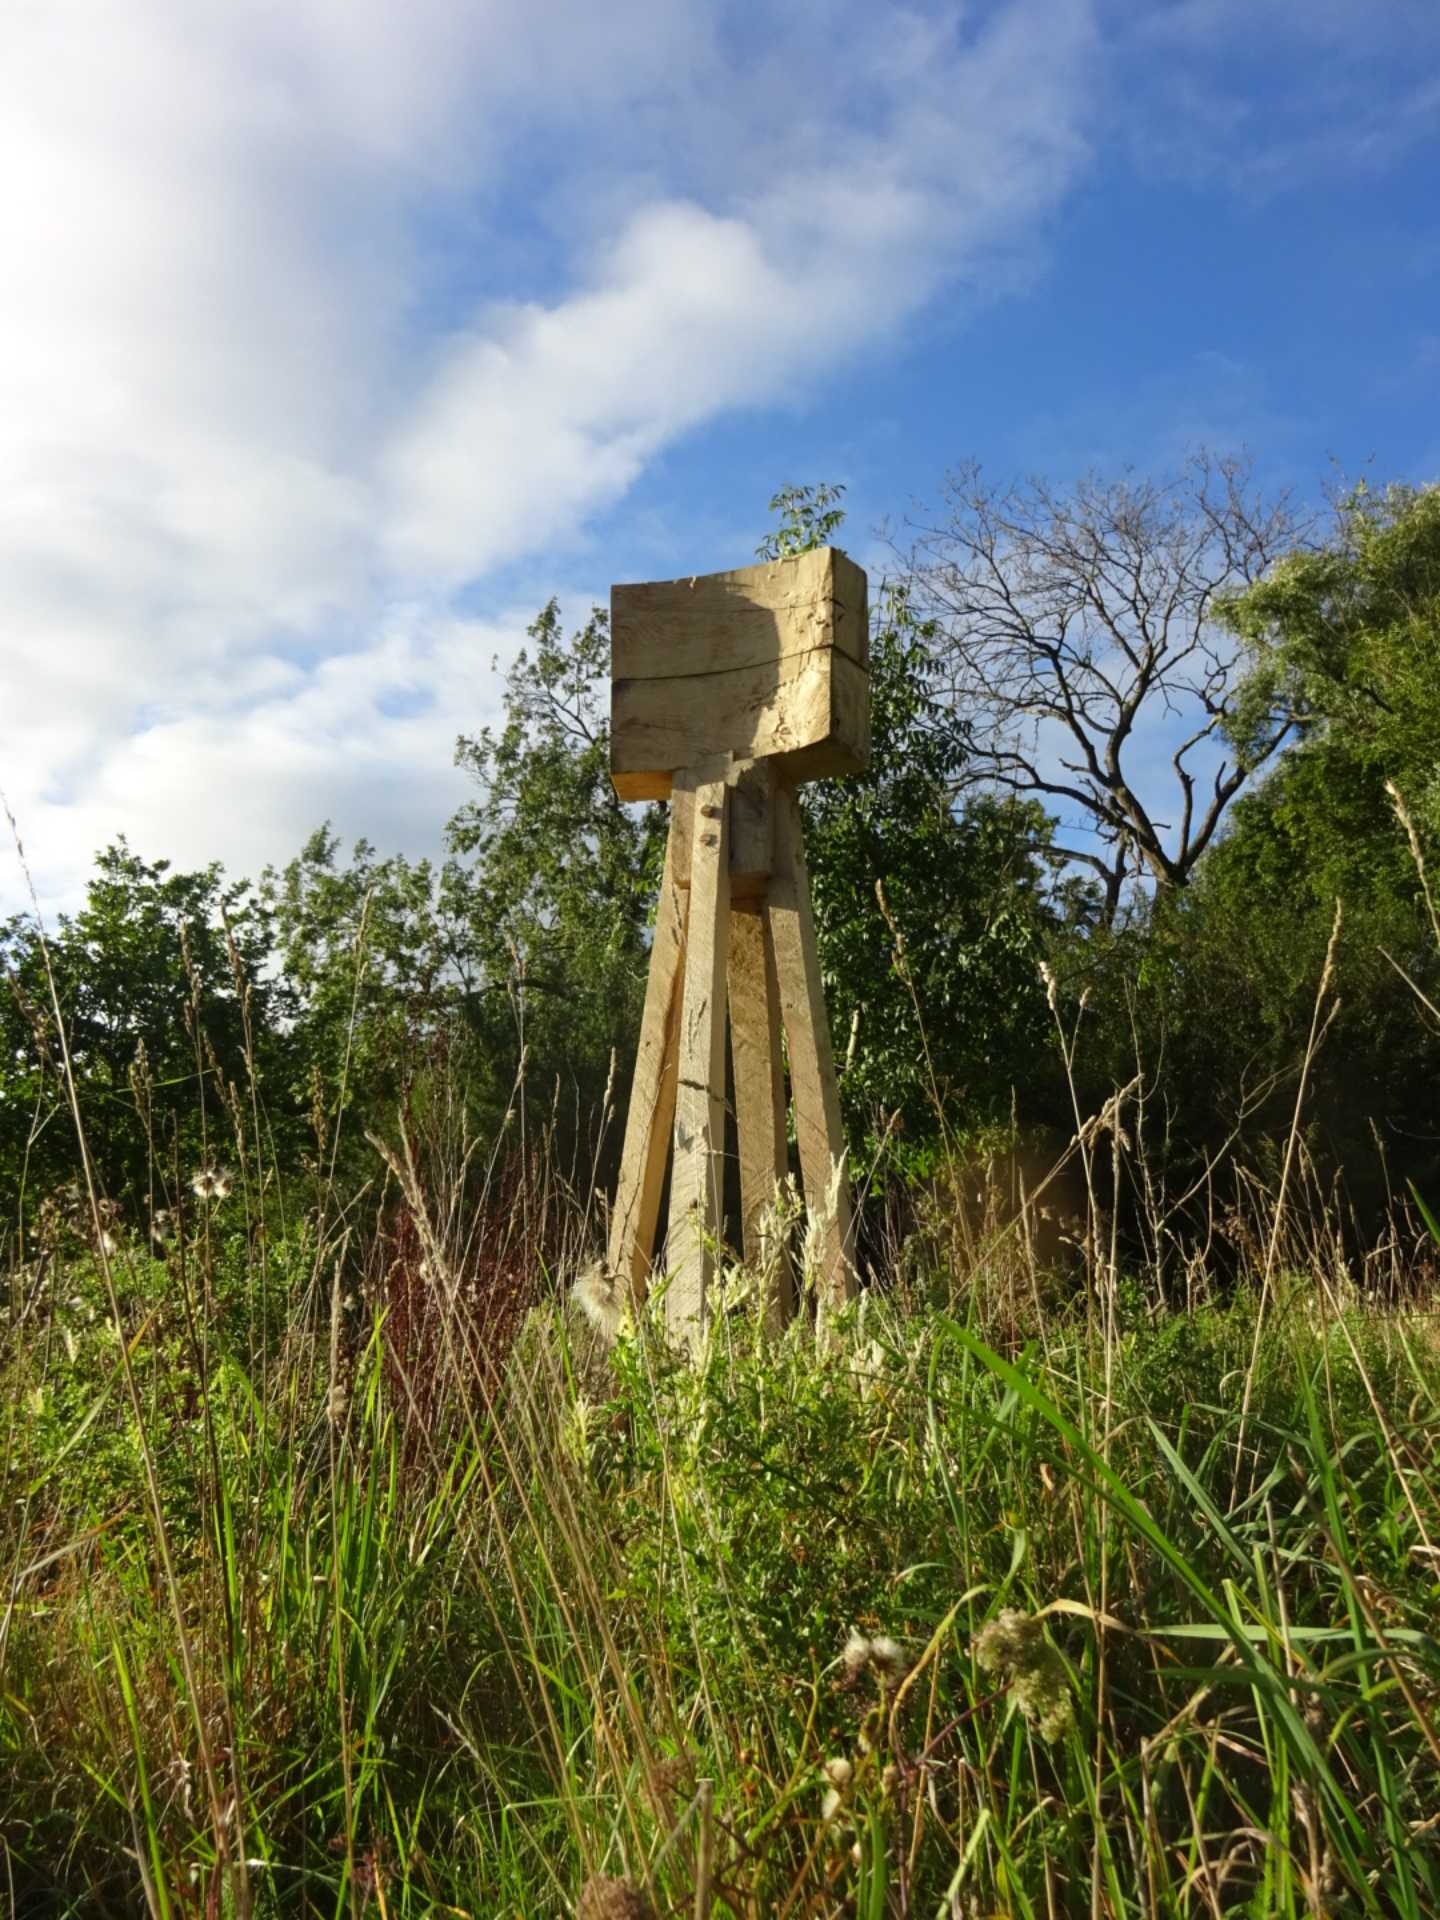 A large concave wooden square atop 4 legs stood in a tree lined field.